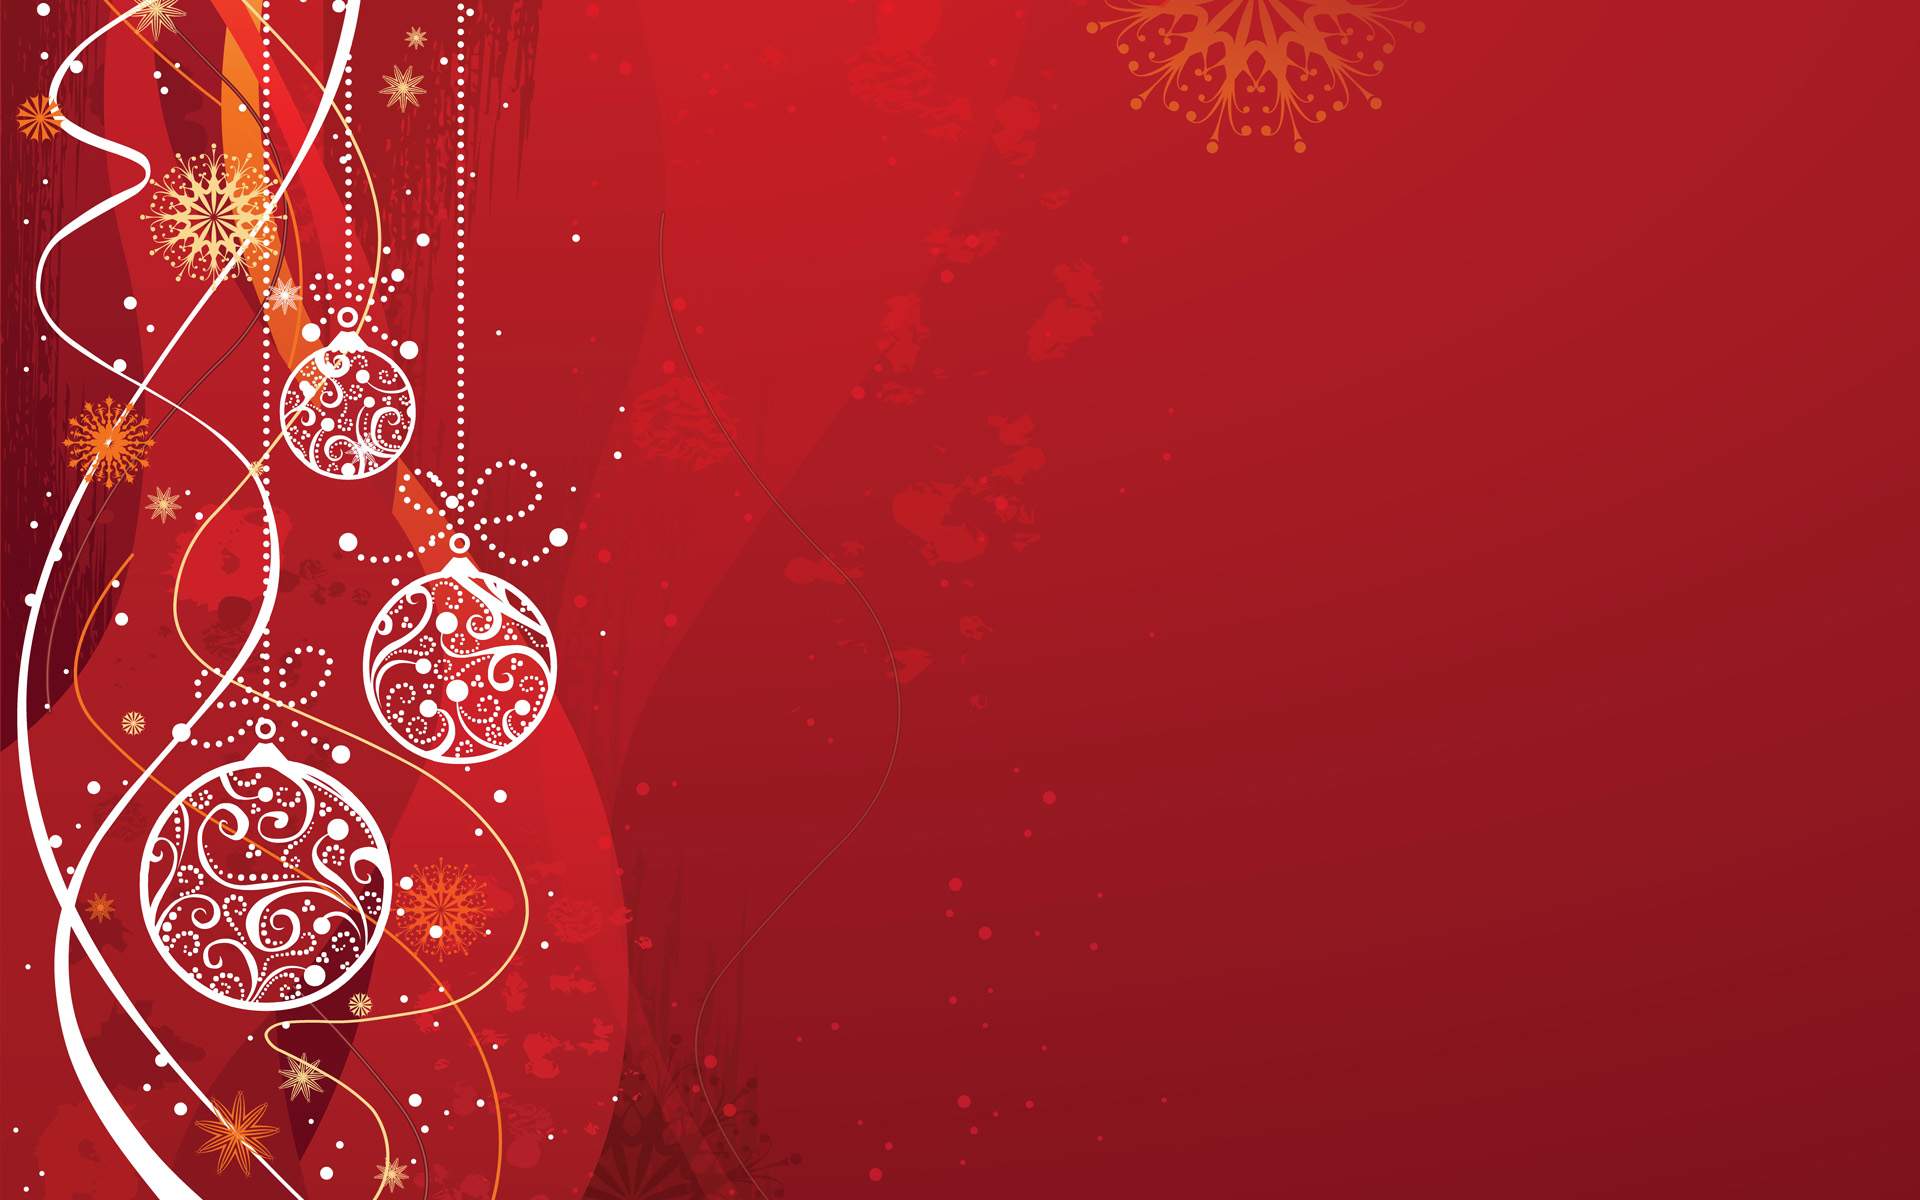 Happy Christmas Wallpaper Sms In